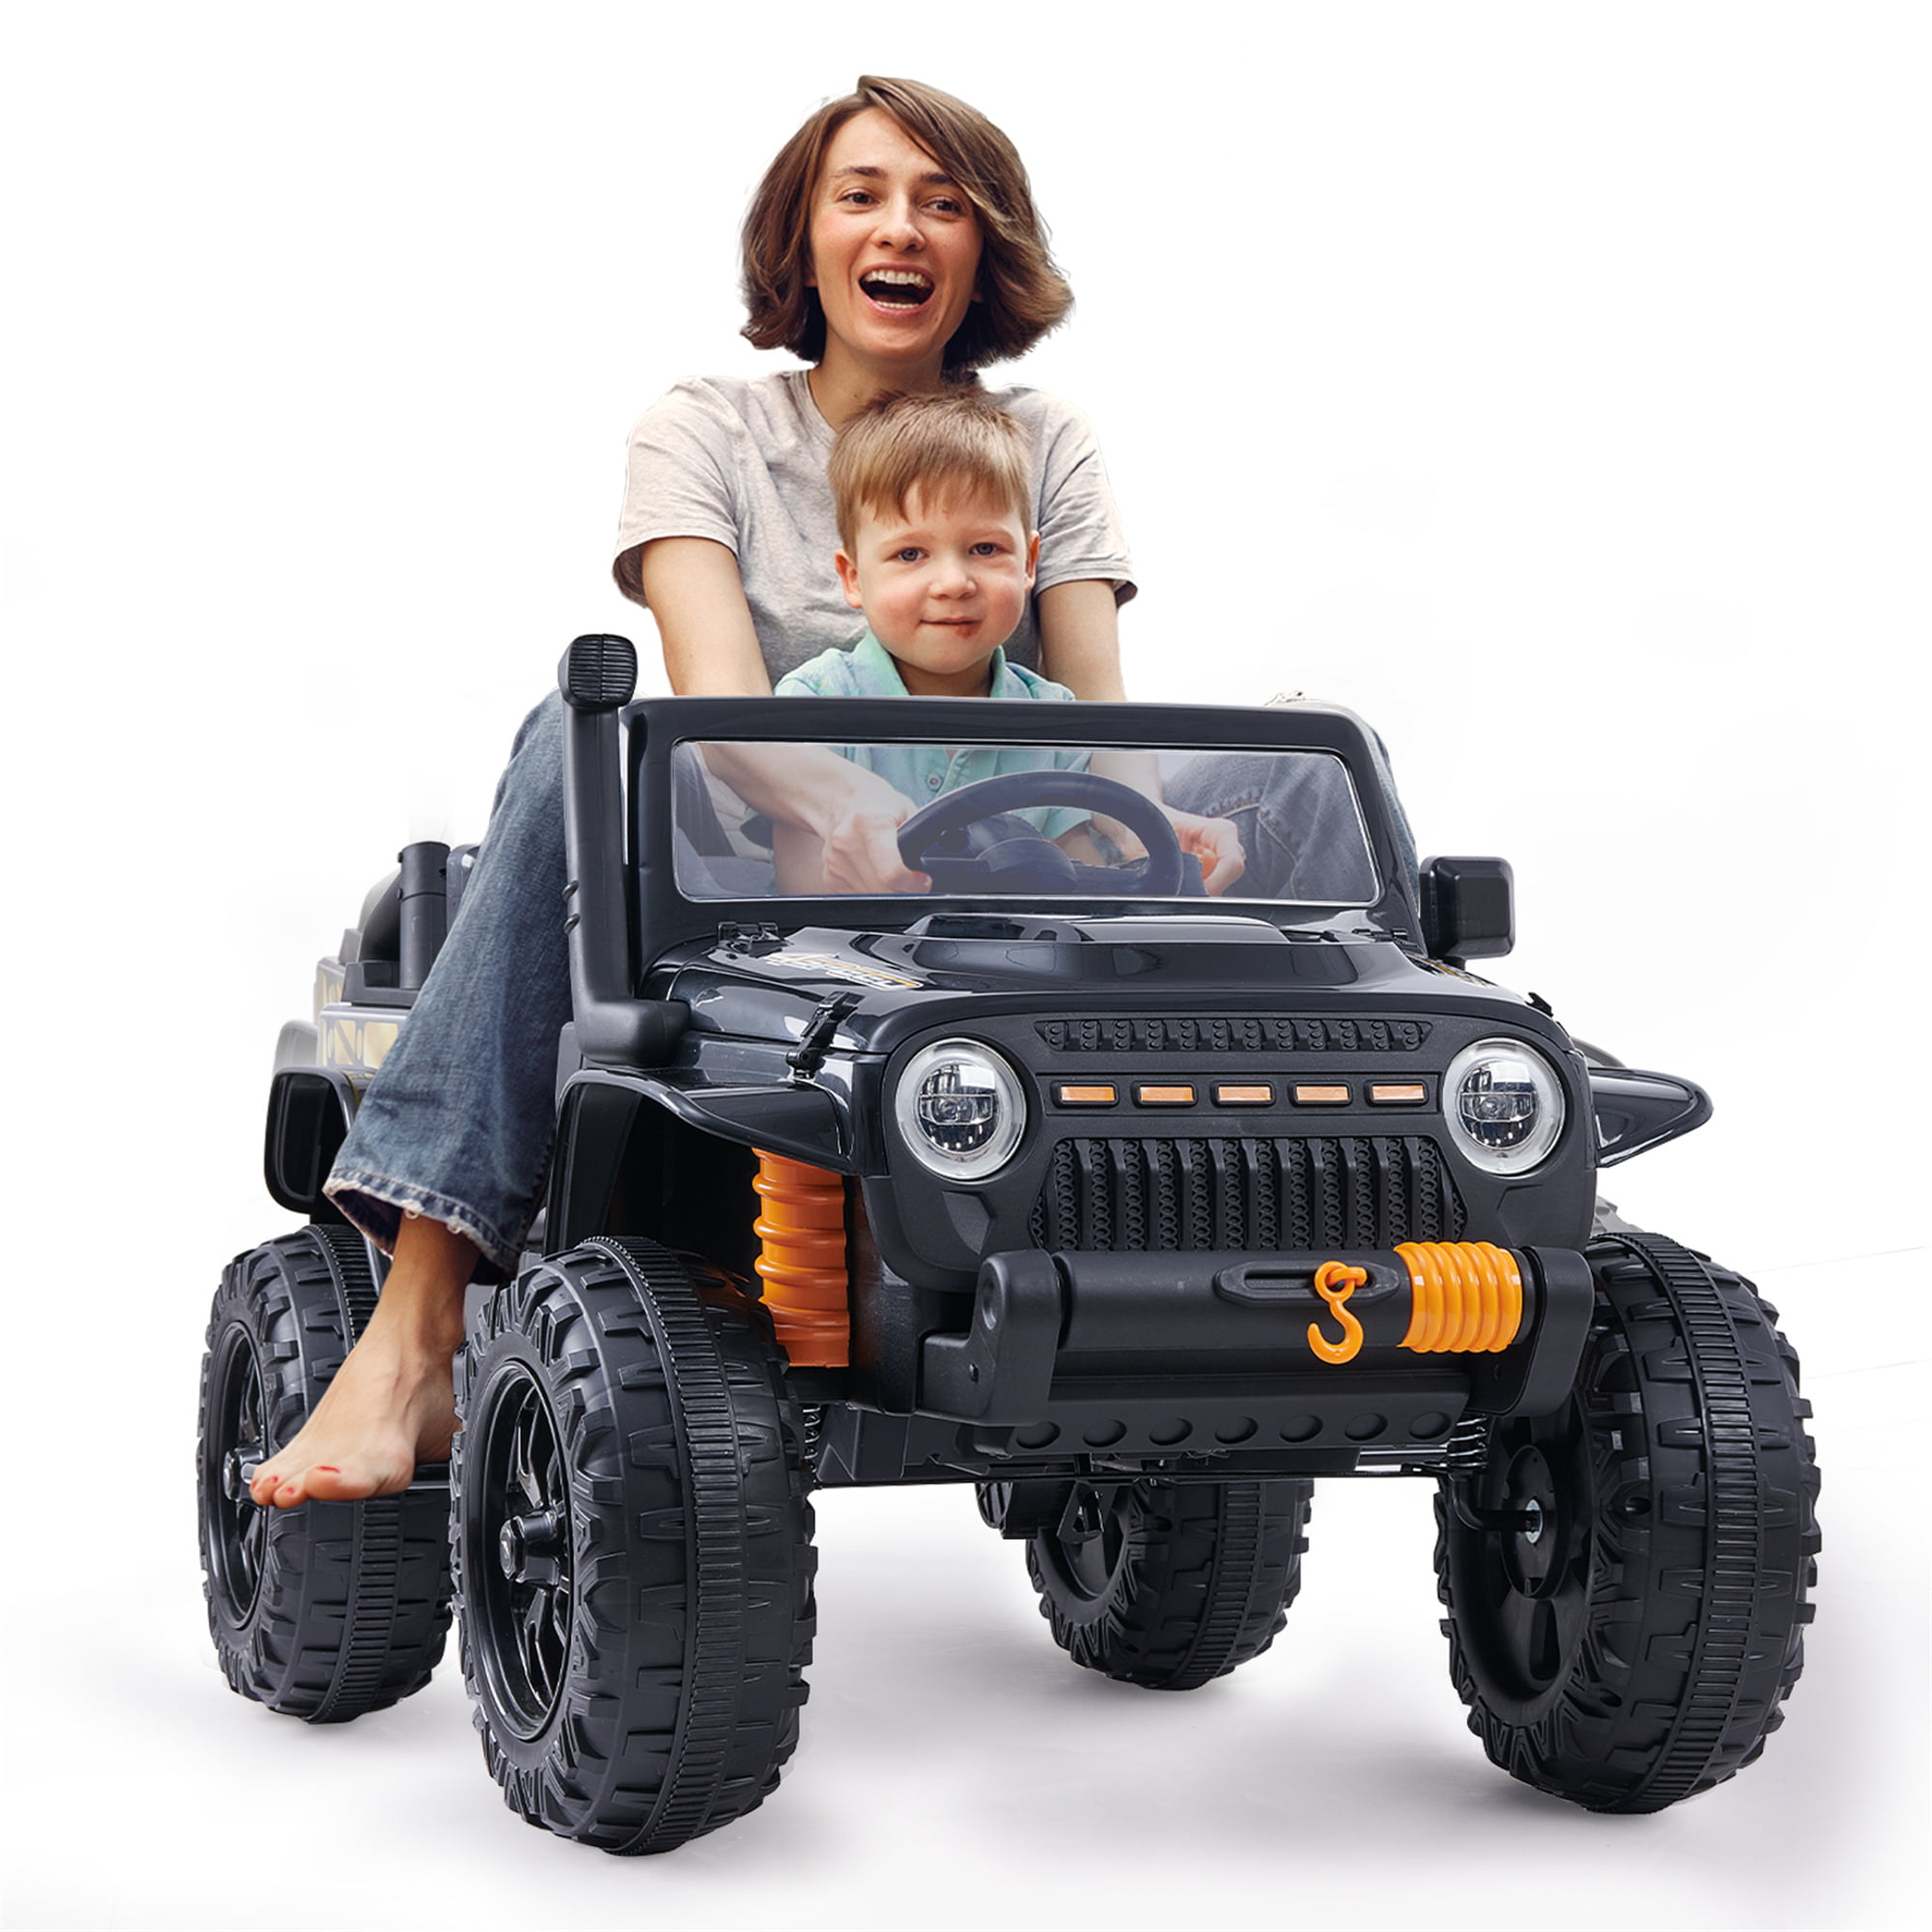 12V Electric Safety Kids Ride on Car Truck Toys 3 Speed LED MP3 w/Remote Control 